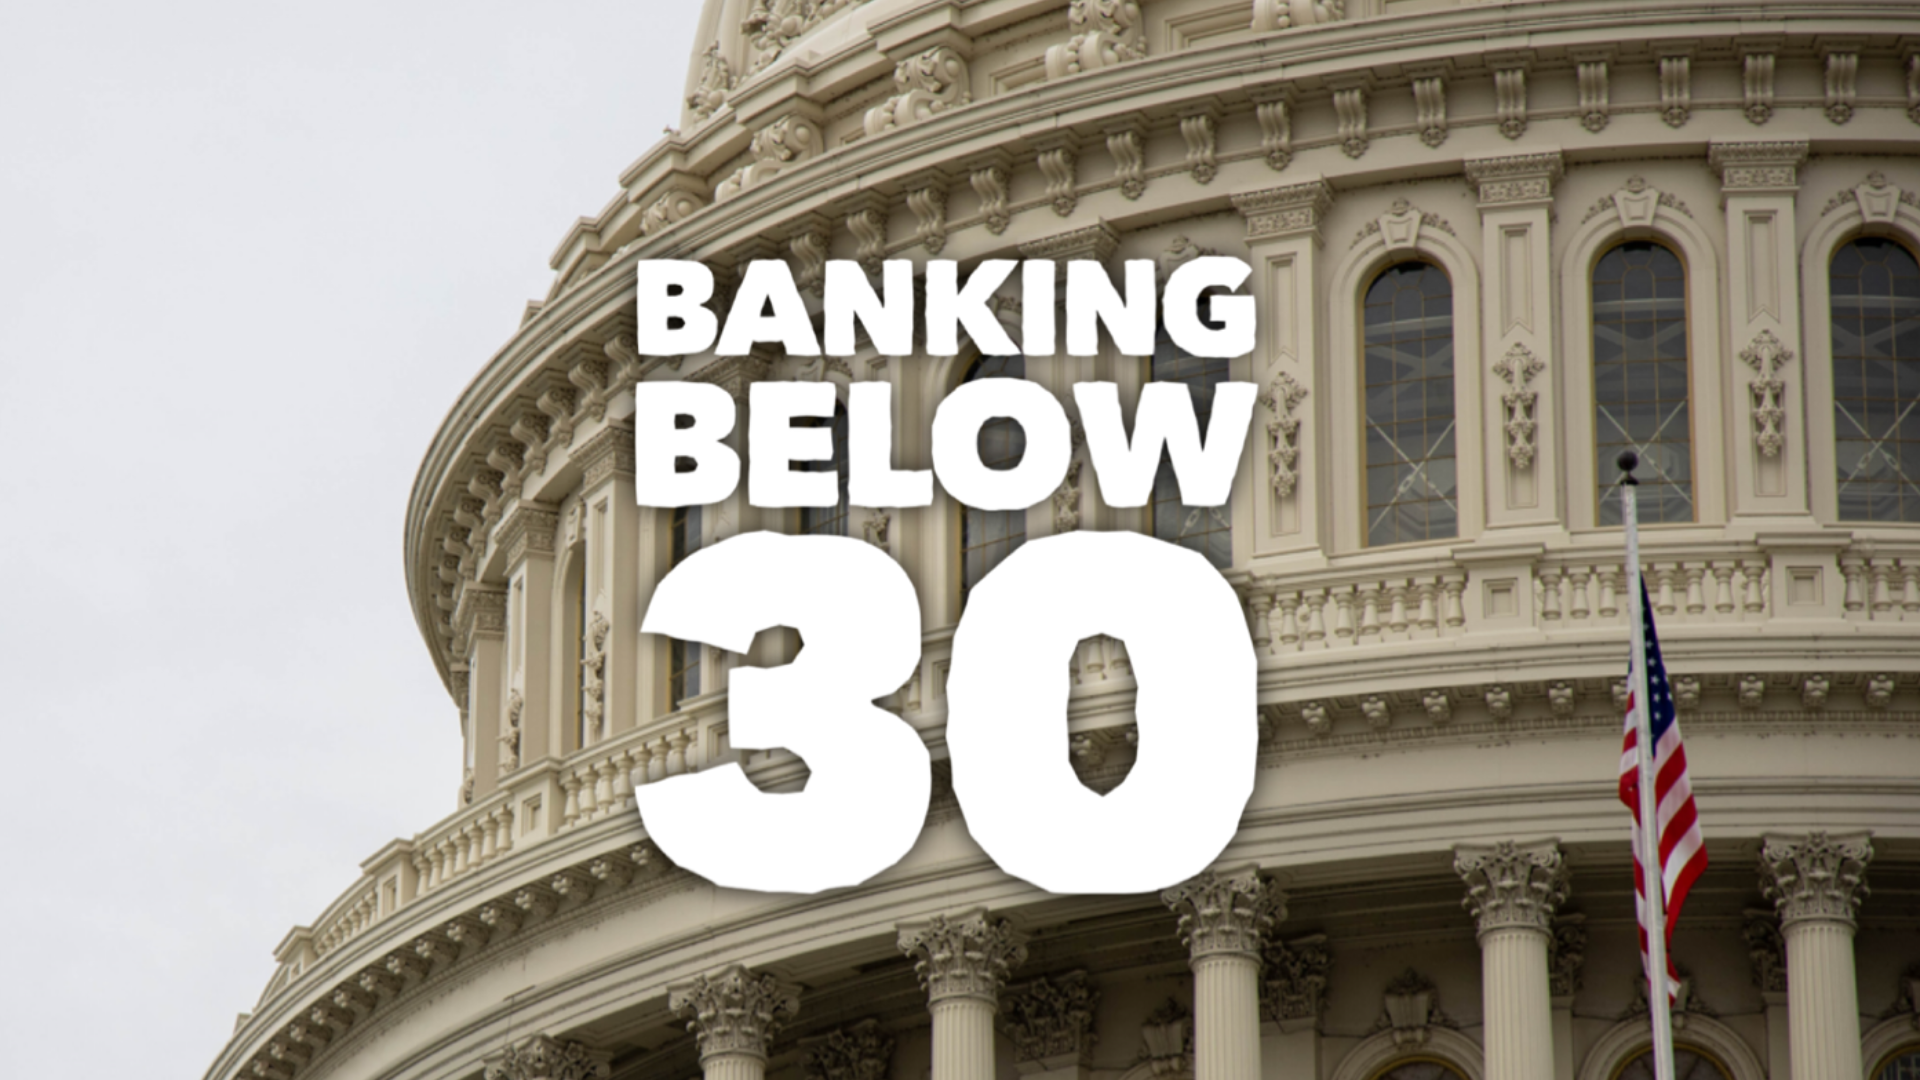 As a result of our "Banking Below 30" investigation, the nation's largest banking regulators are joining forces to study inequalities in lending.